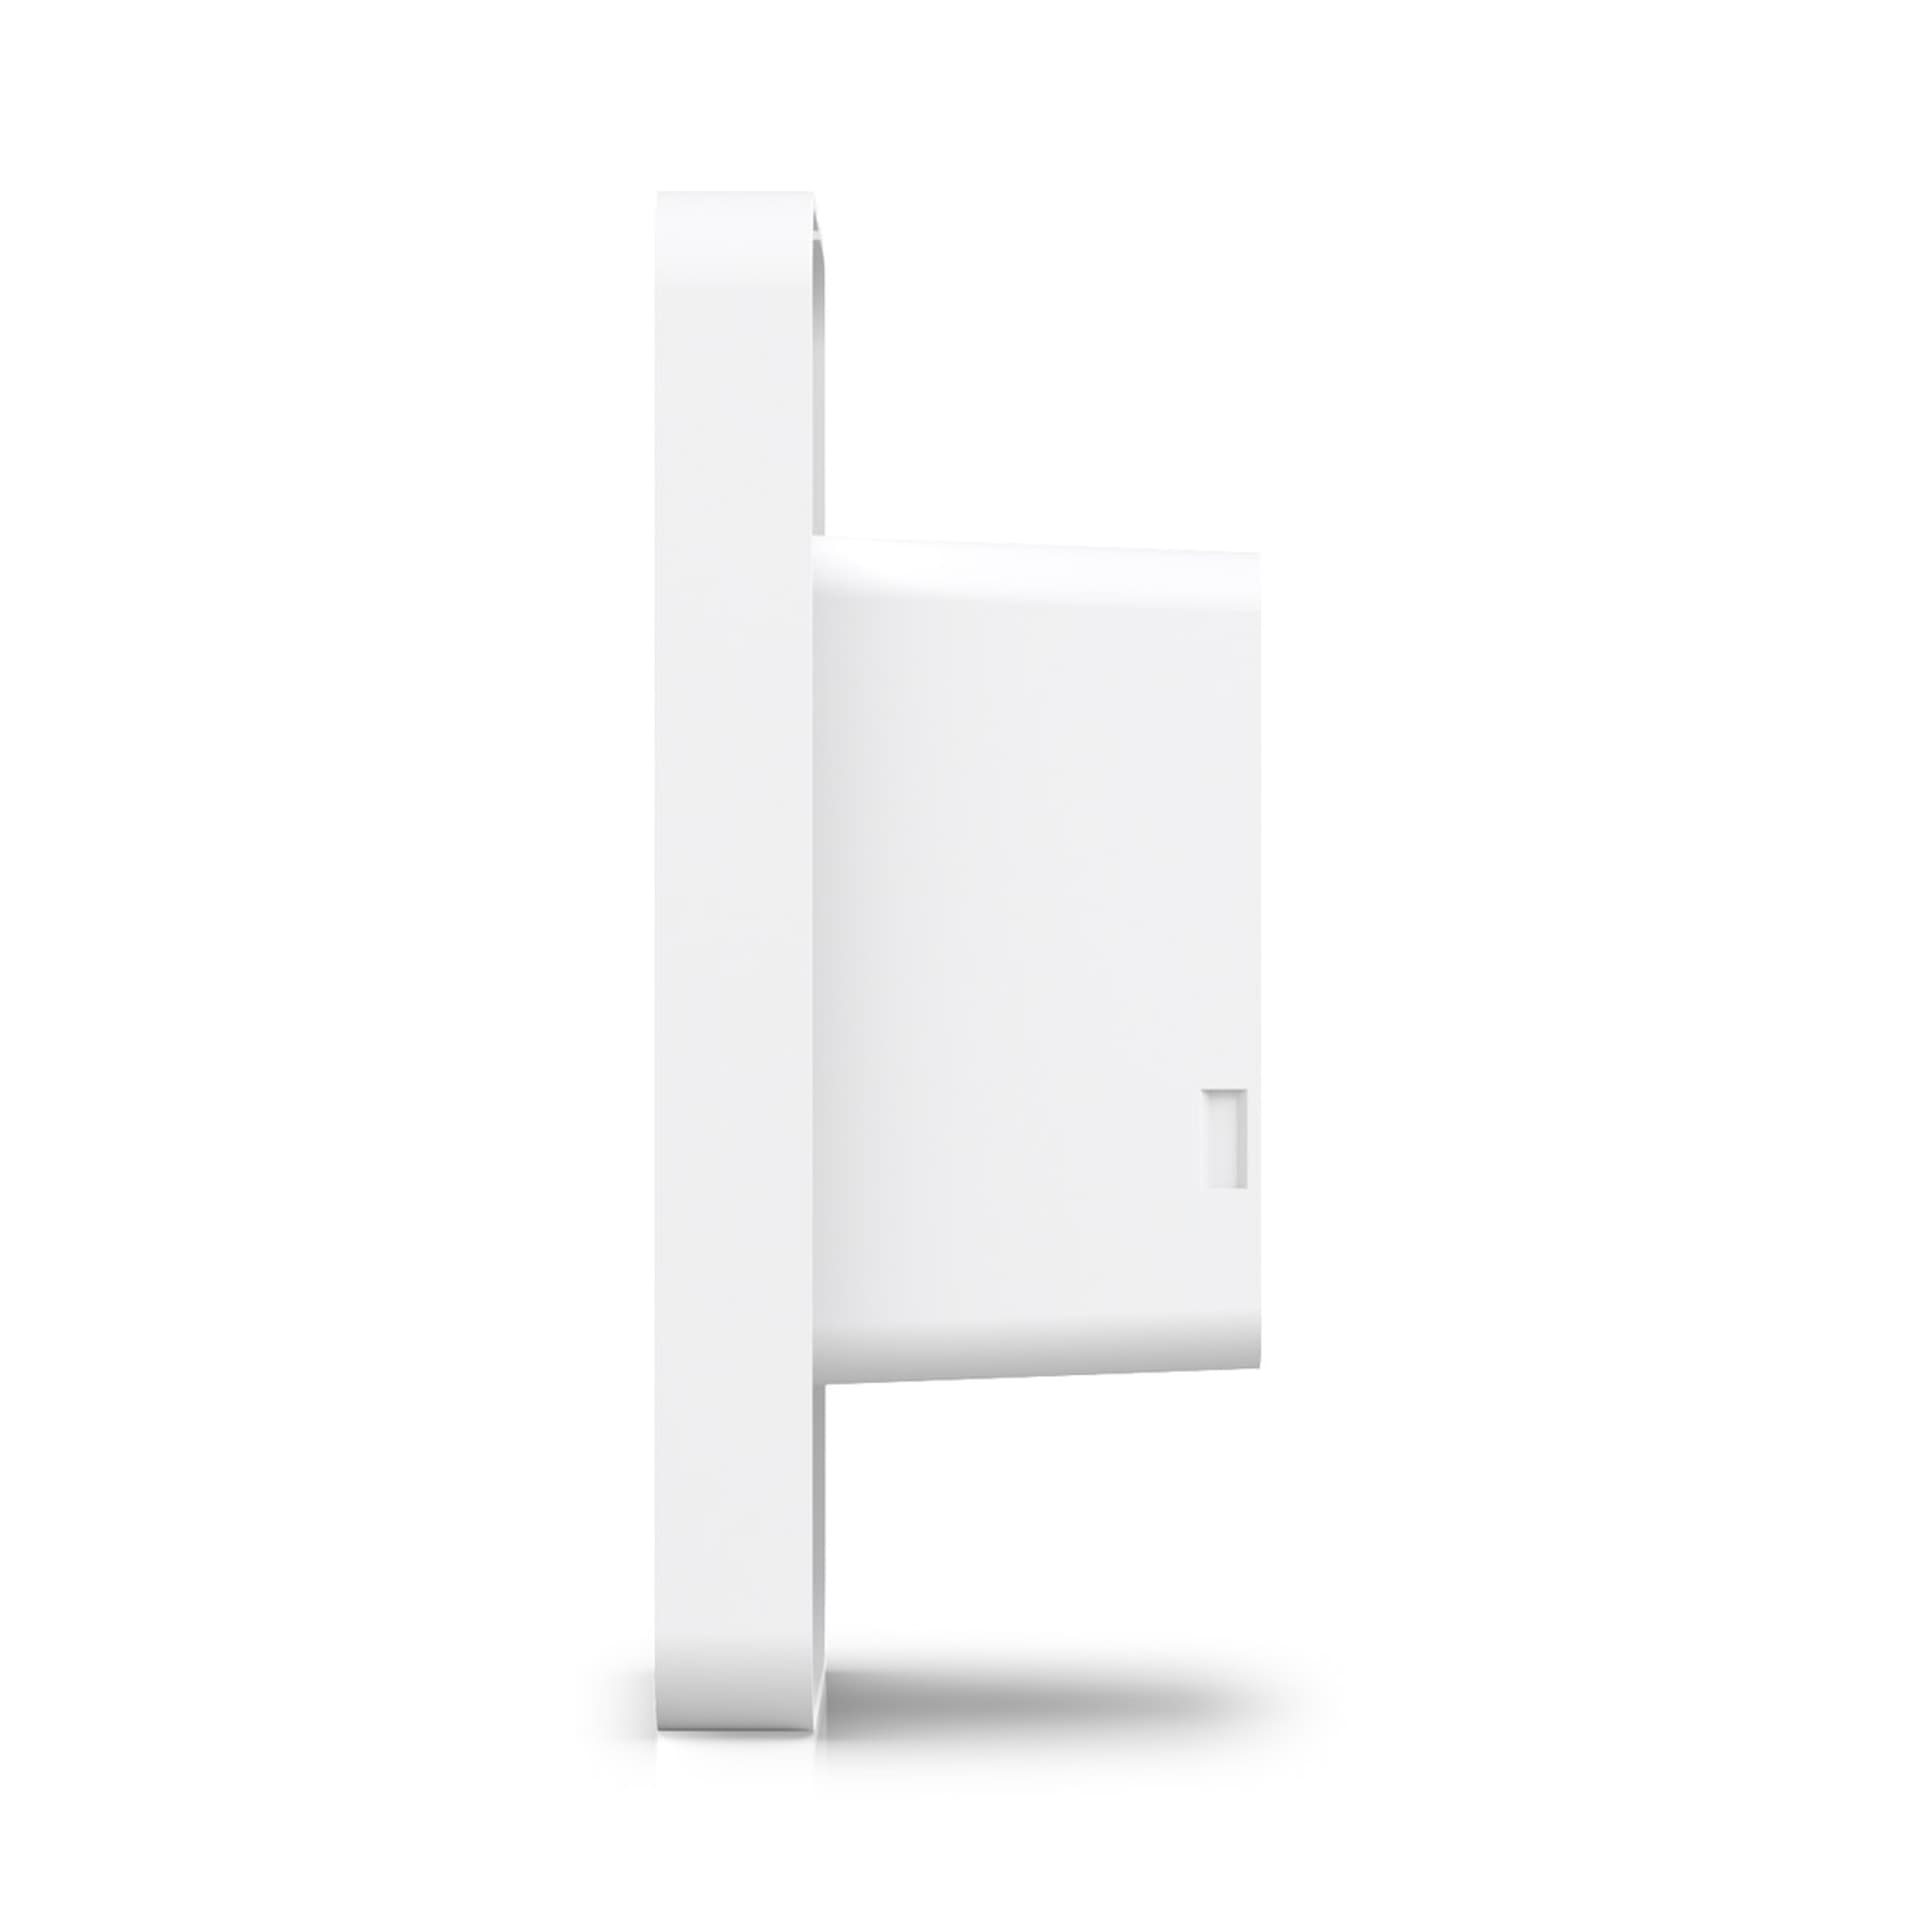 UBIQUITI UA-G2 UNIFI ACCESS 2ND GENERATION COMPACT INDOOR/OUTDOOR READER FOR ORGANIZATIONS, WITH INTEGRATED WELCOME SPEAKER AND LED FLASH